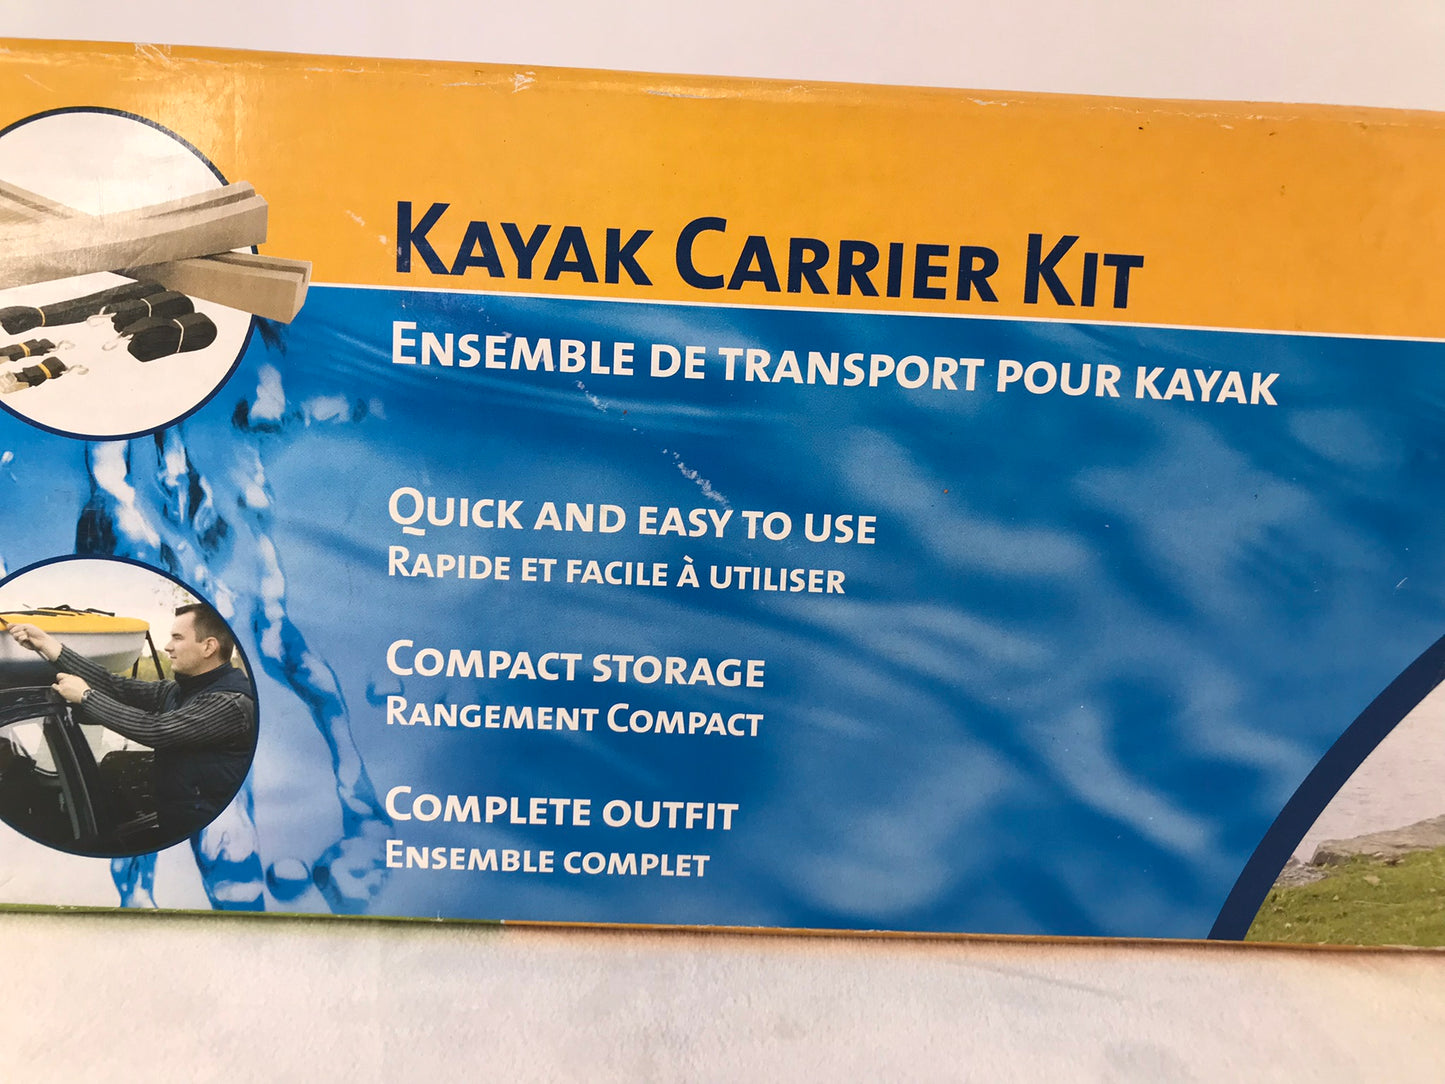 Kayak Carrier Kit Pelican Car Carrier New In Box Never Used